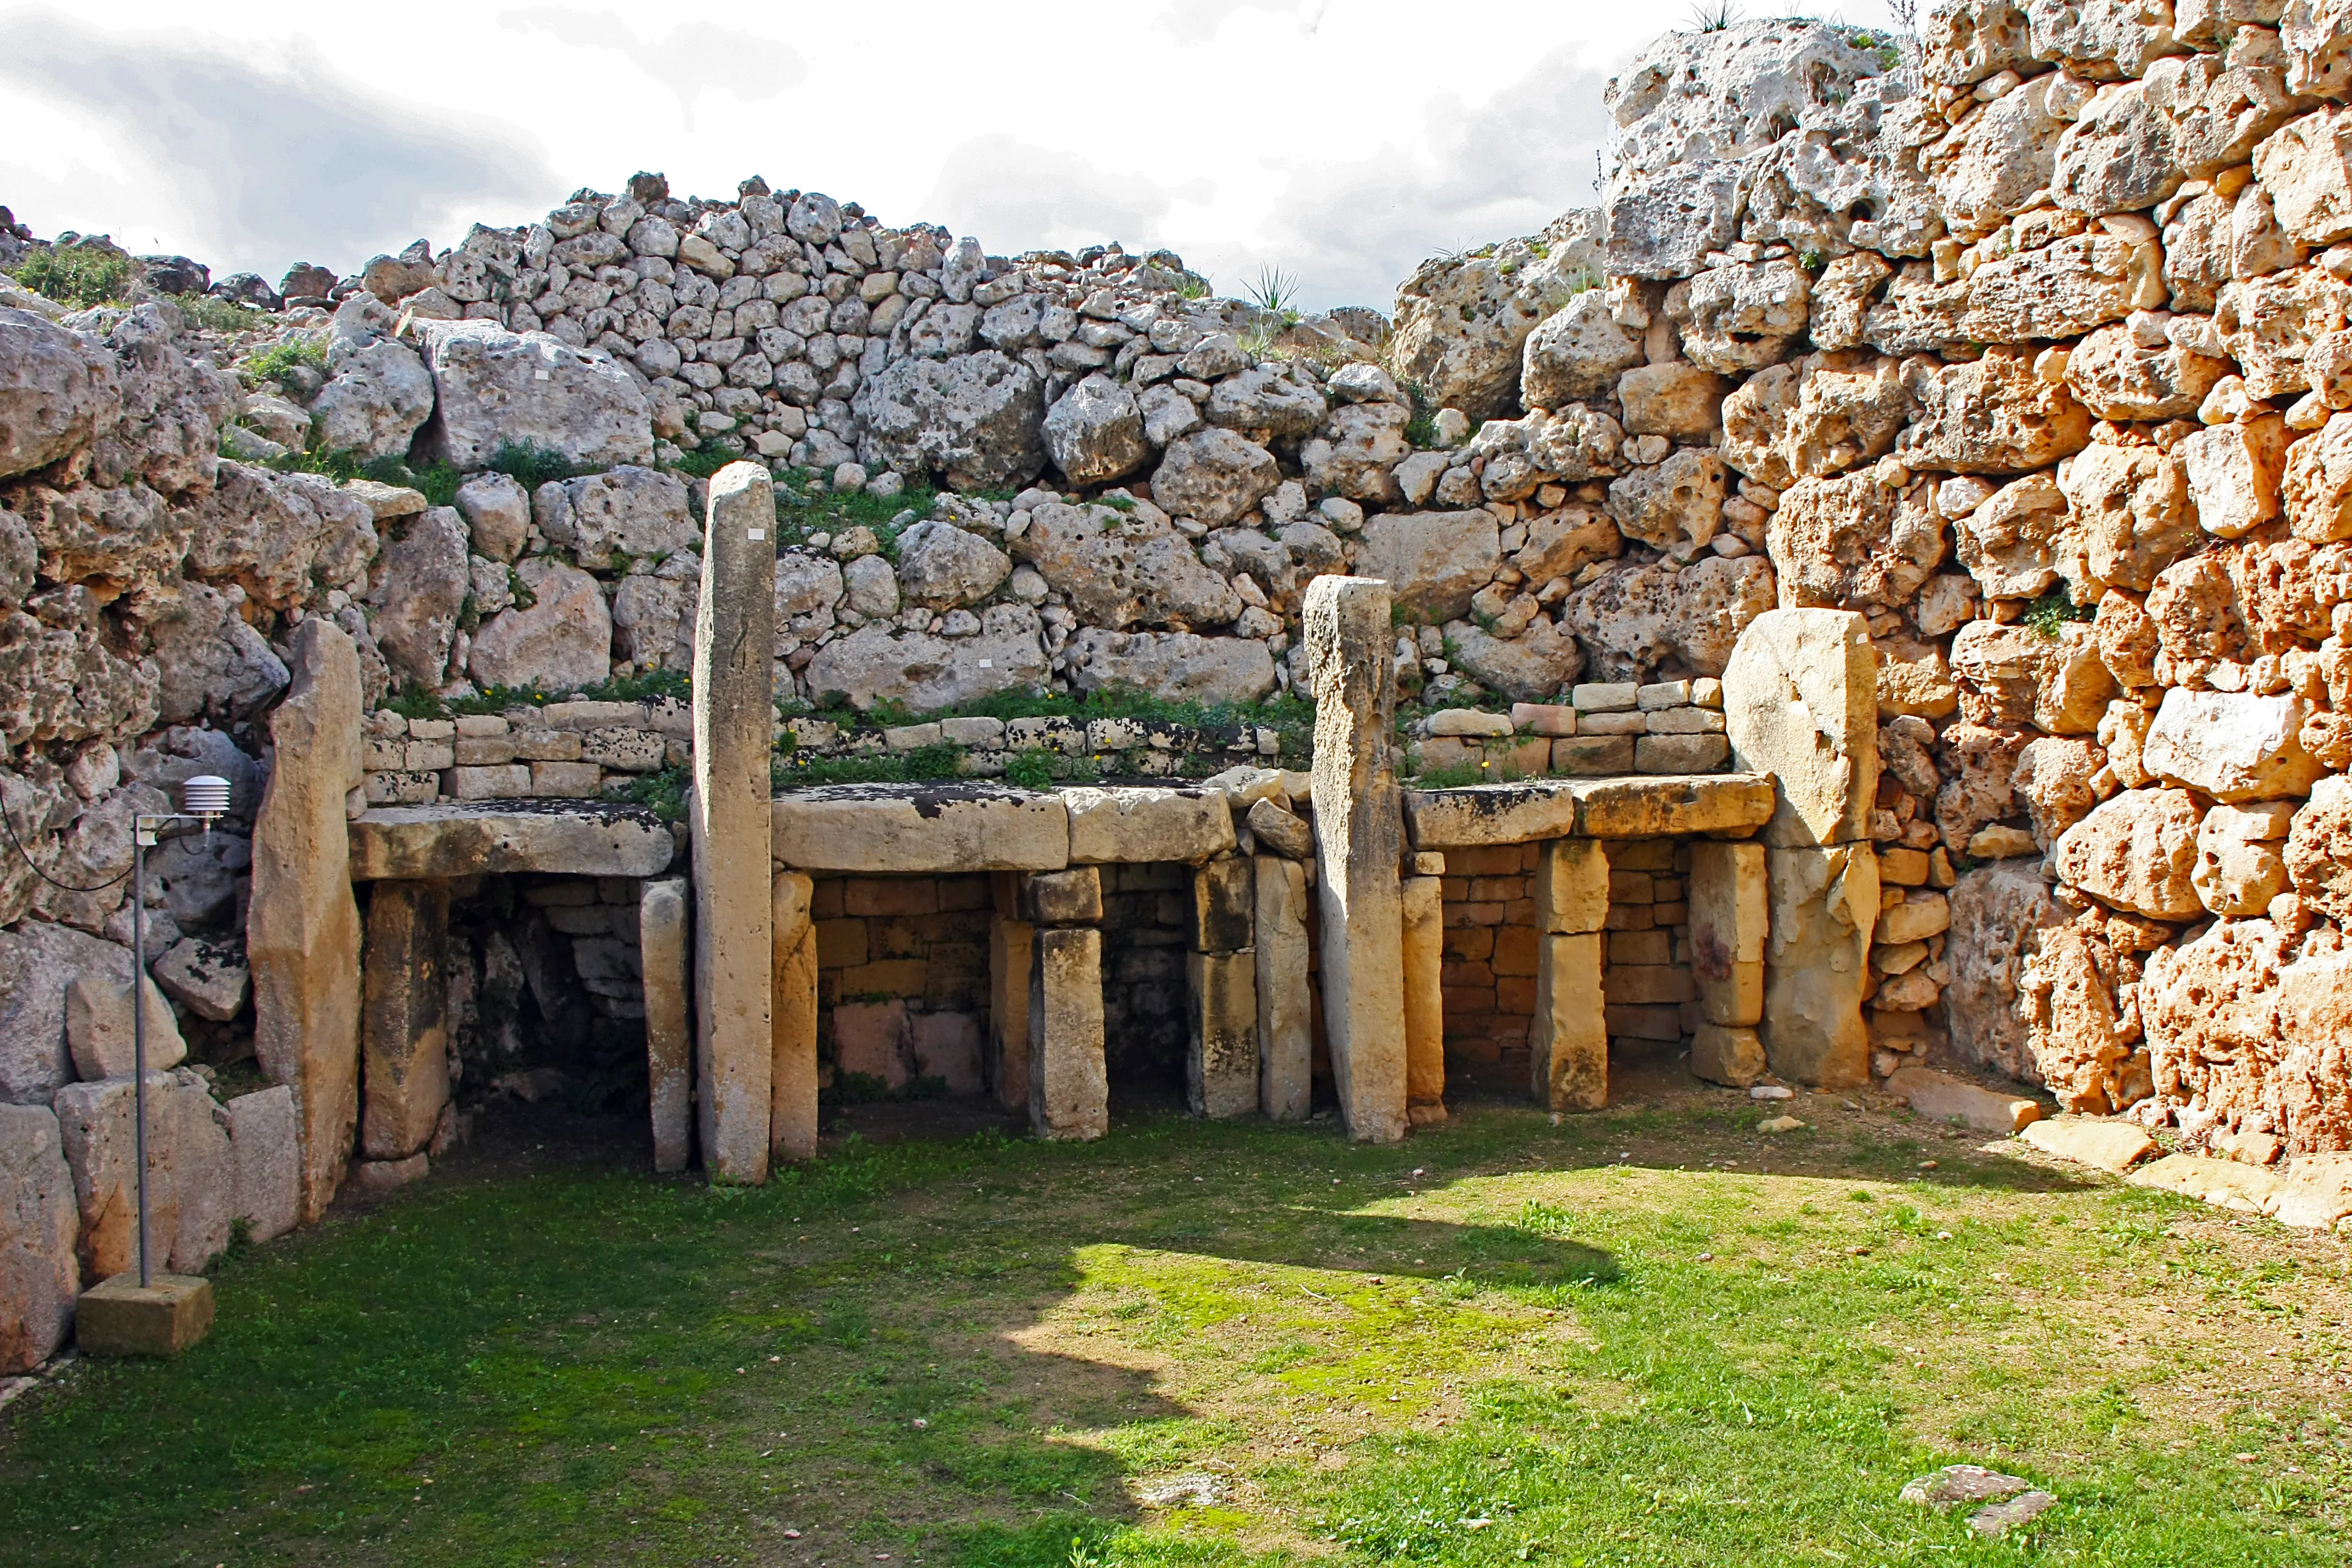 The Giant Temples in Malta, Europe | Excavations - Rated 3.6